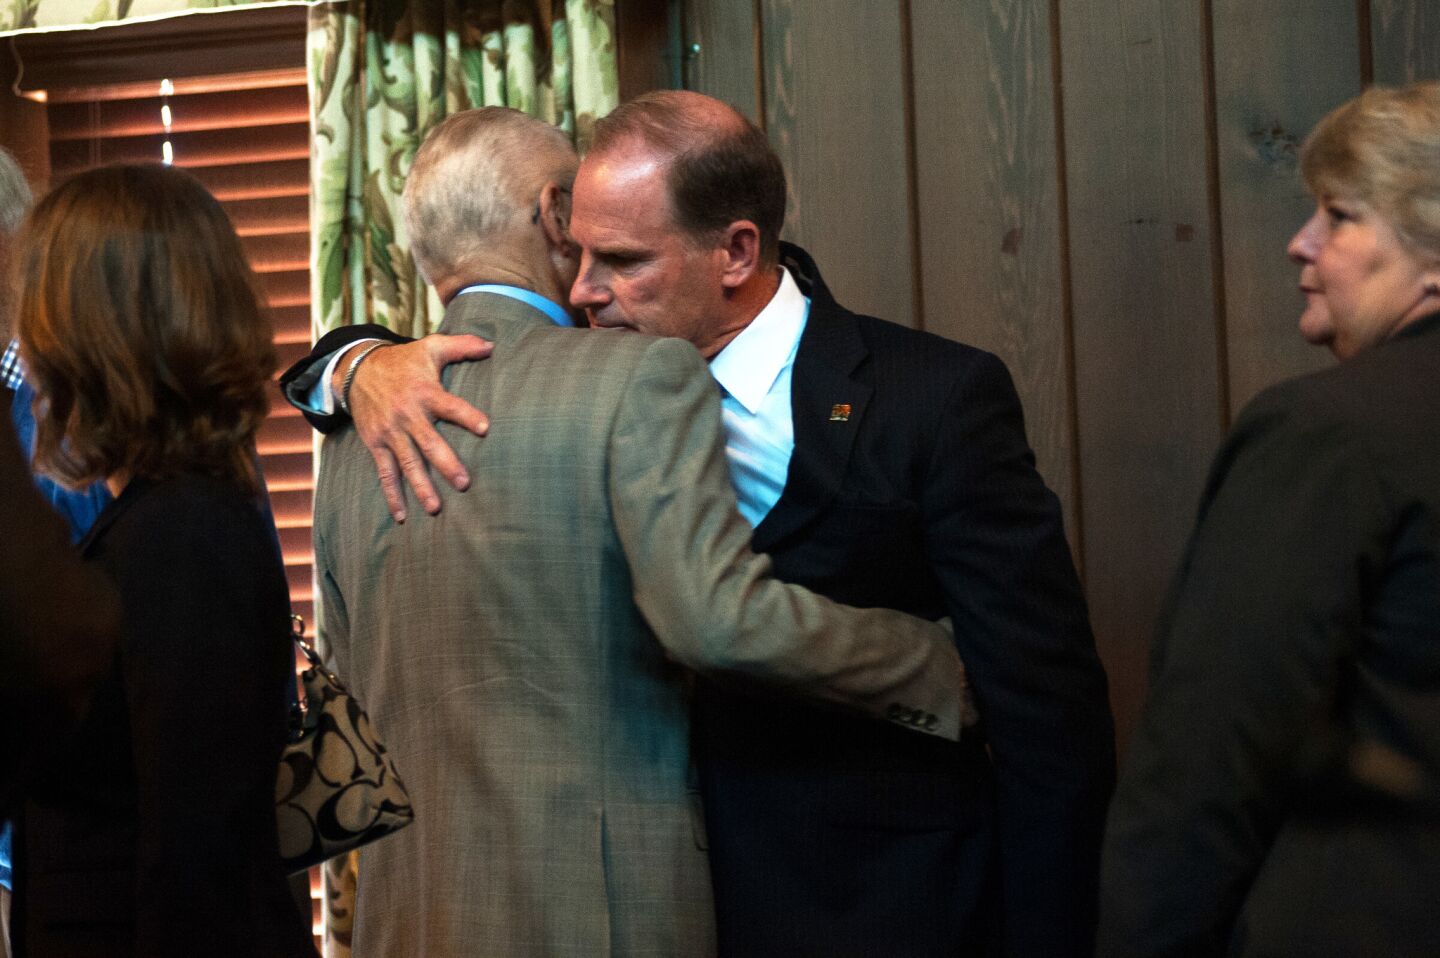 University of Missouri System President Tim Wolfe, at right, hugs university curator Marcy Graham after announcing his resignation during a Board of Curators meeting Monday at the University of Missouri in Columbia, Mo. FOR THE RECORD: An earlier version of this caption misidentified Wolfe; he is at right, not center.